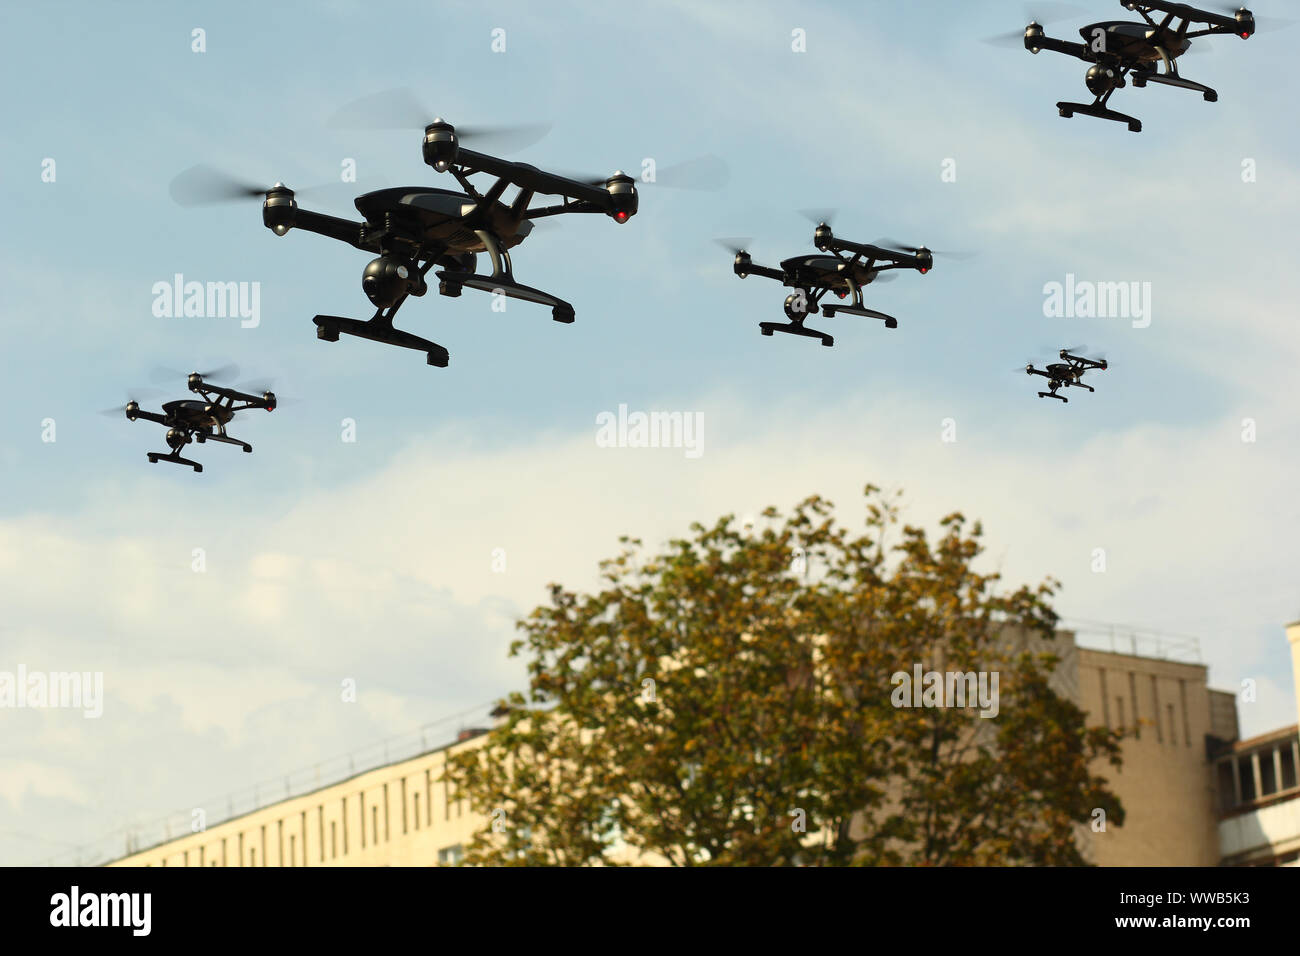 Swarm of Unmanned Aircraft System (UAV) Quadcopters Drones In The Air Over City Stock Photo